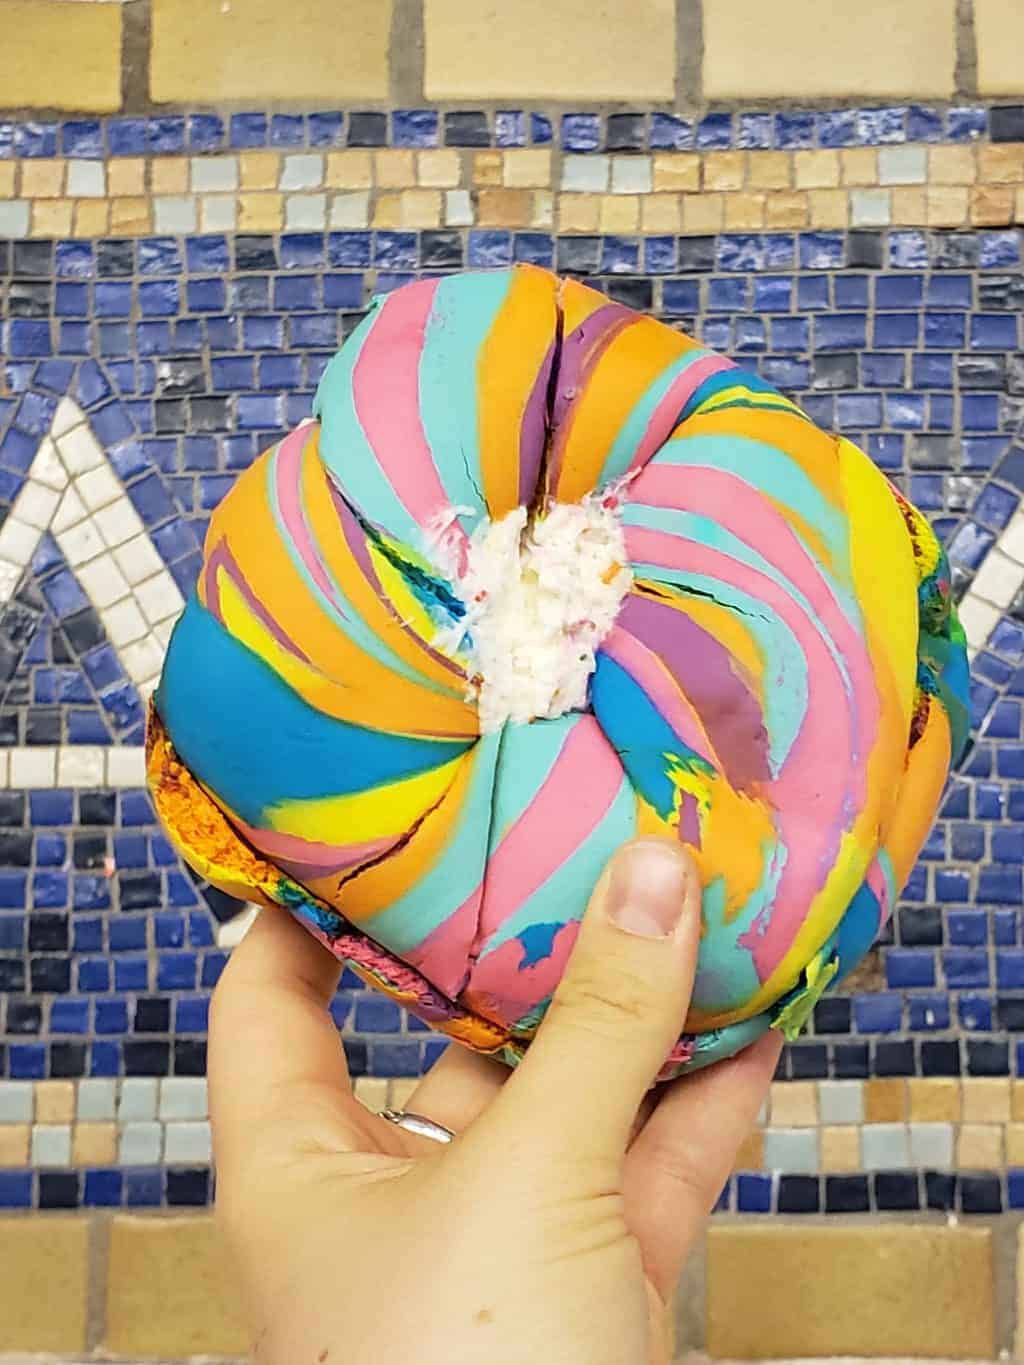 One of the most unusual things to do in NYC is to stop by the Bagel Store in Brooklyn and pick up a rainbow bagel with cake better cream cheese!